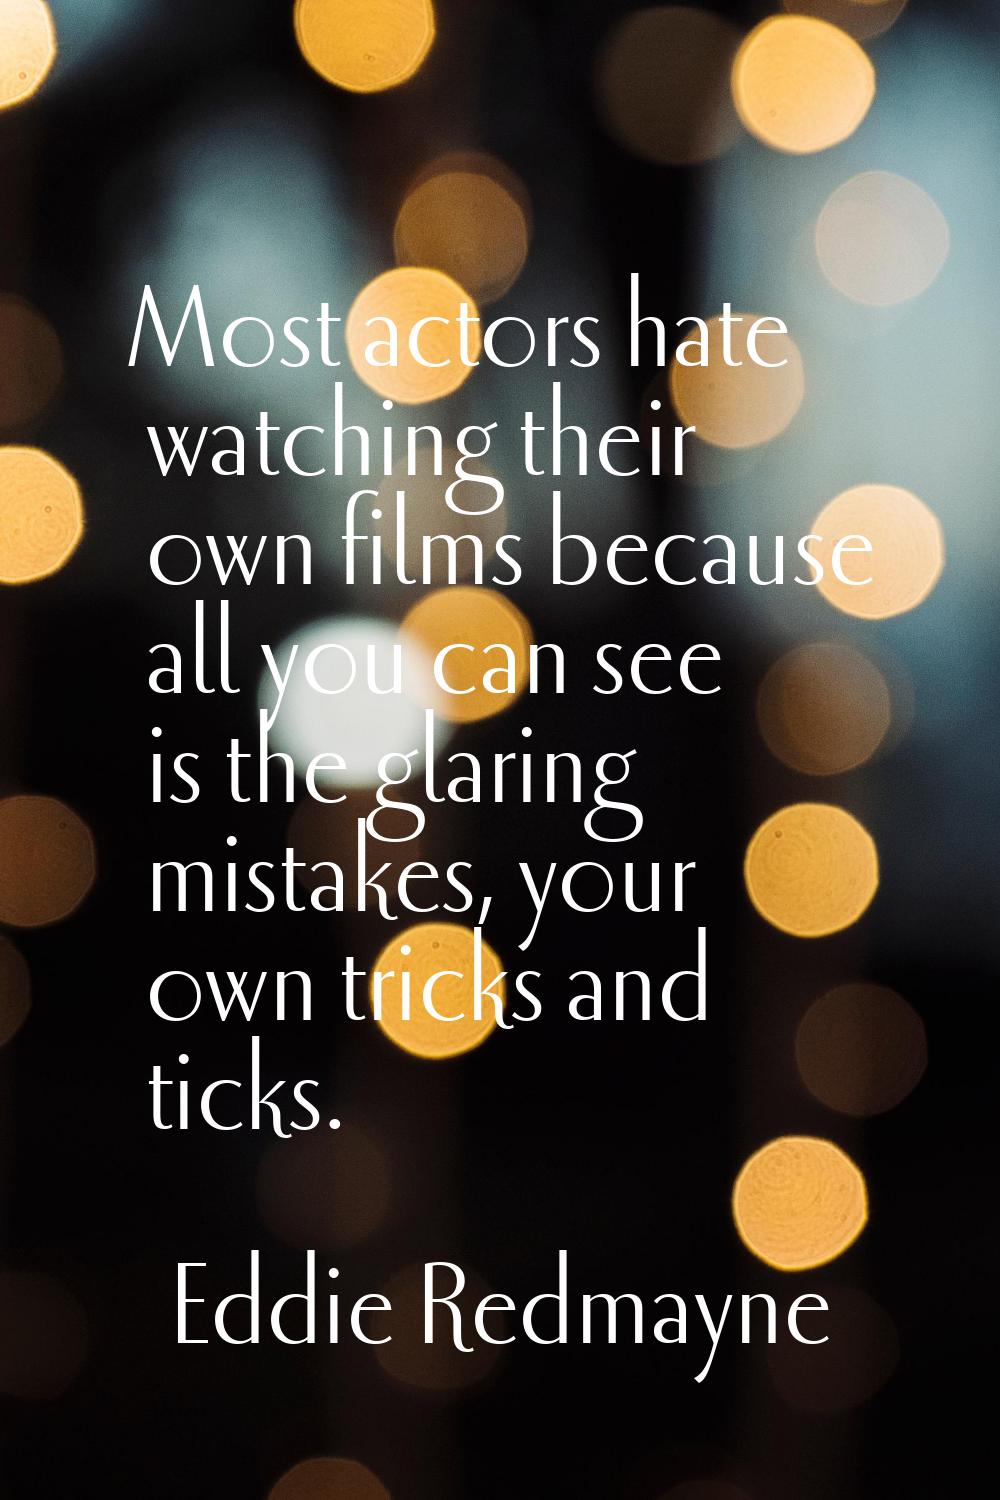 Most actors hate watching their own films because all you can see is the glaring mistakes, your own